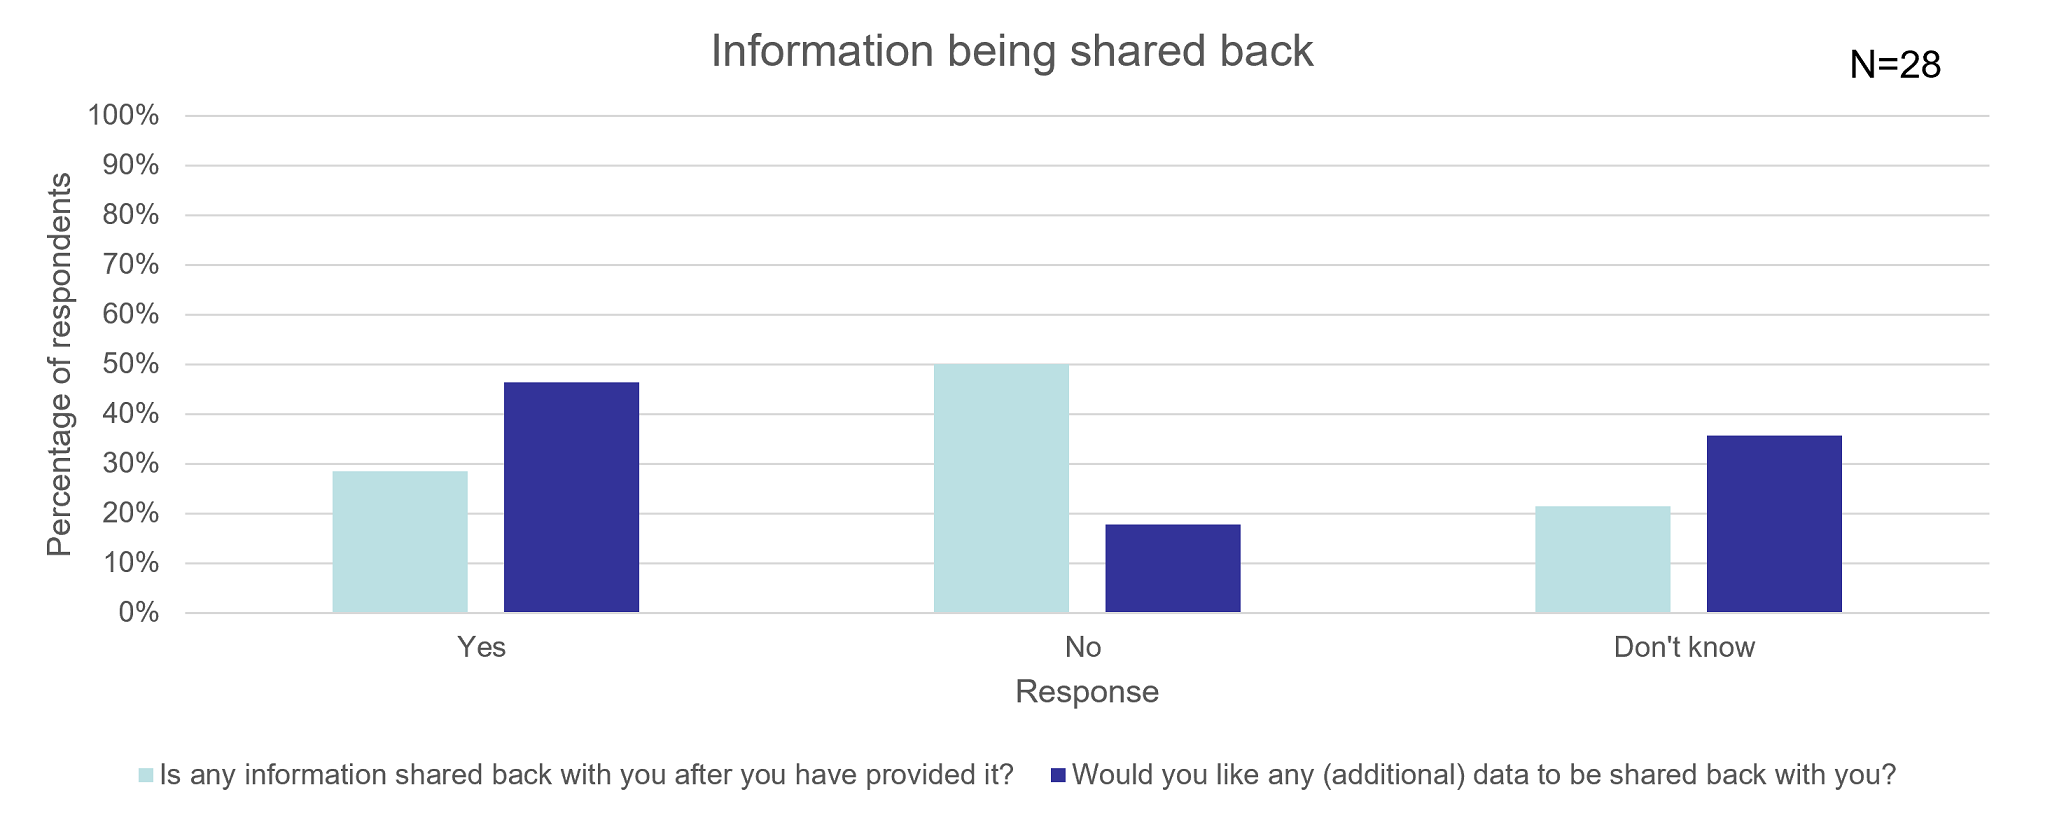 This chart shows the producers thoughts on data being shared back. The light blue shows their thoughts on whether information was shared back and the dark blue shows whether they would like additional data shared back with them.